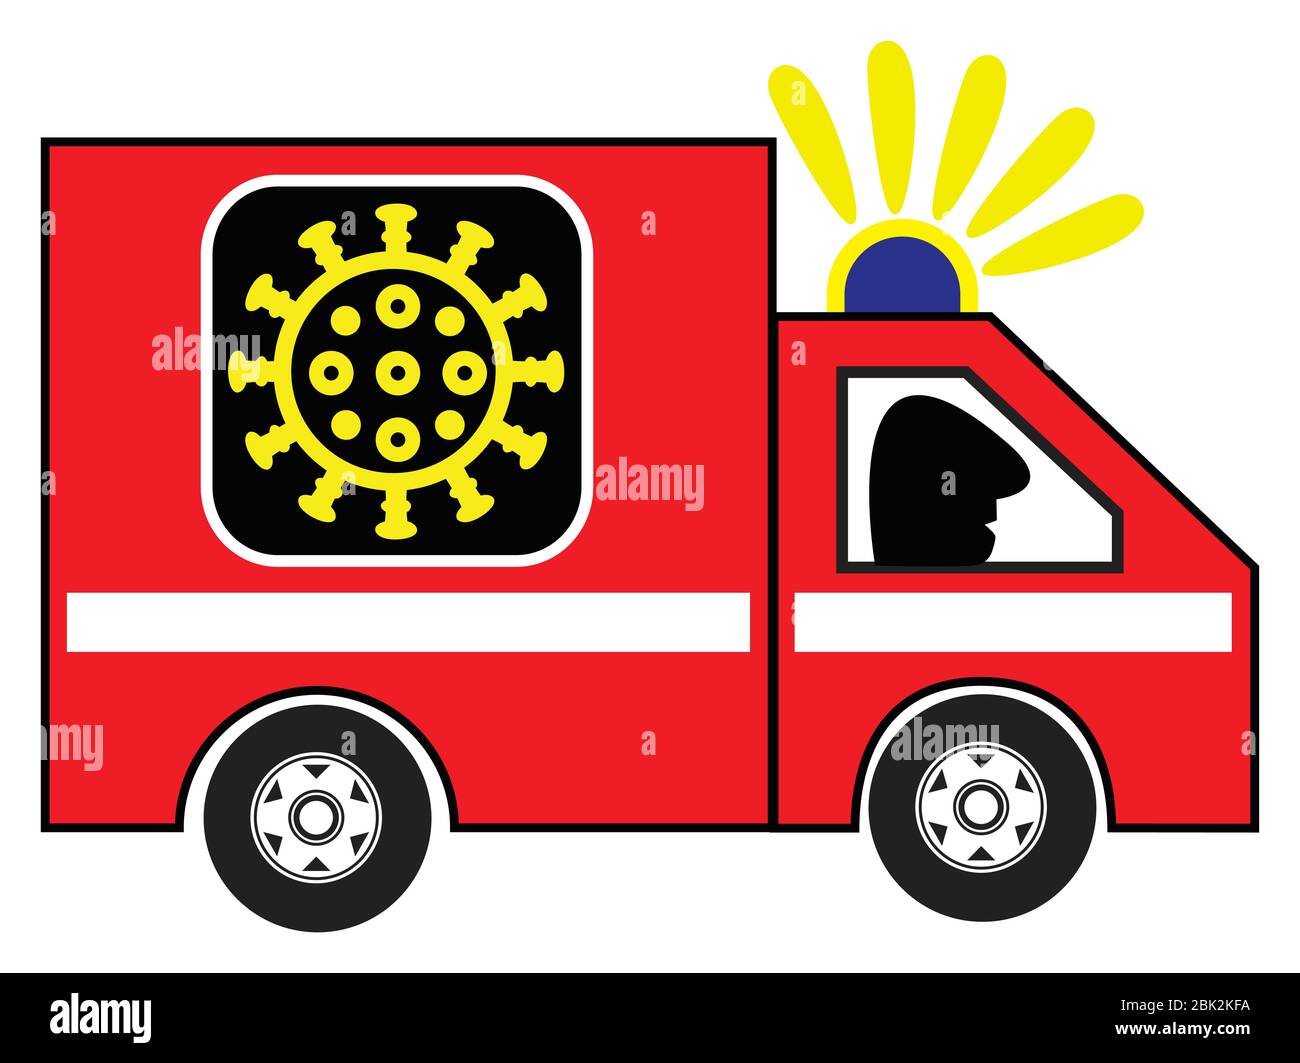 Caricature of emergency vehicle to fight the COVID-19 pandemic Stock Photo